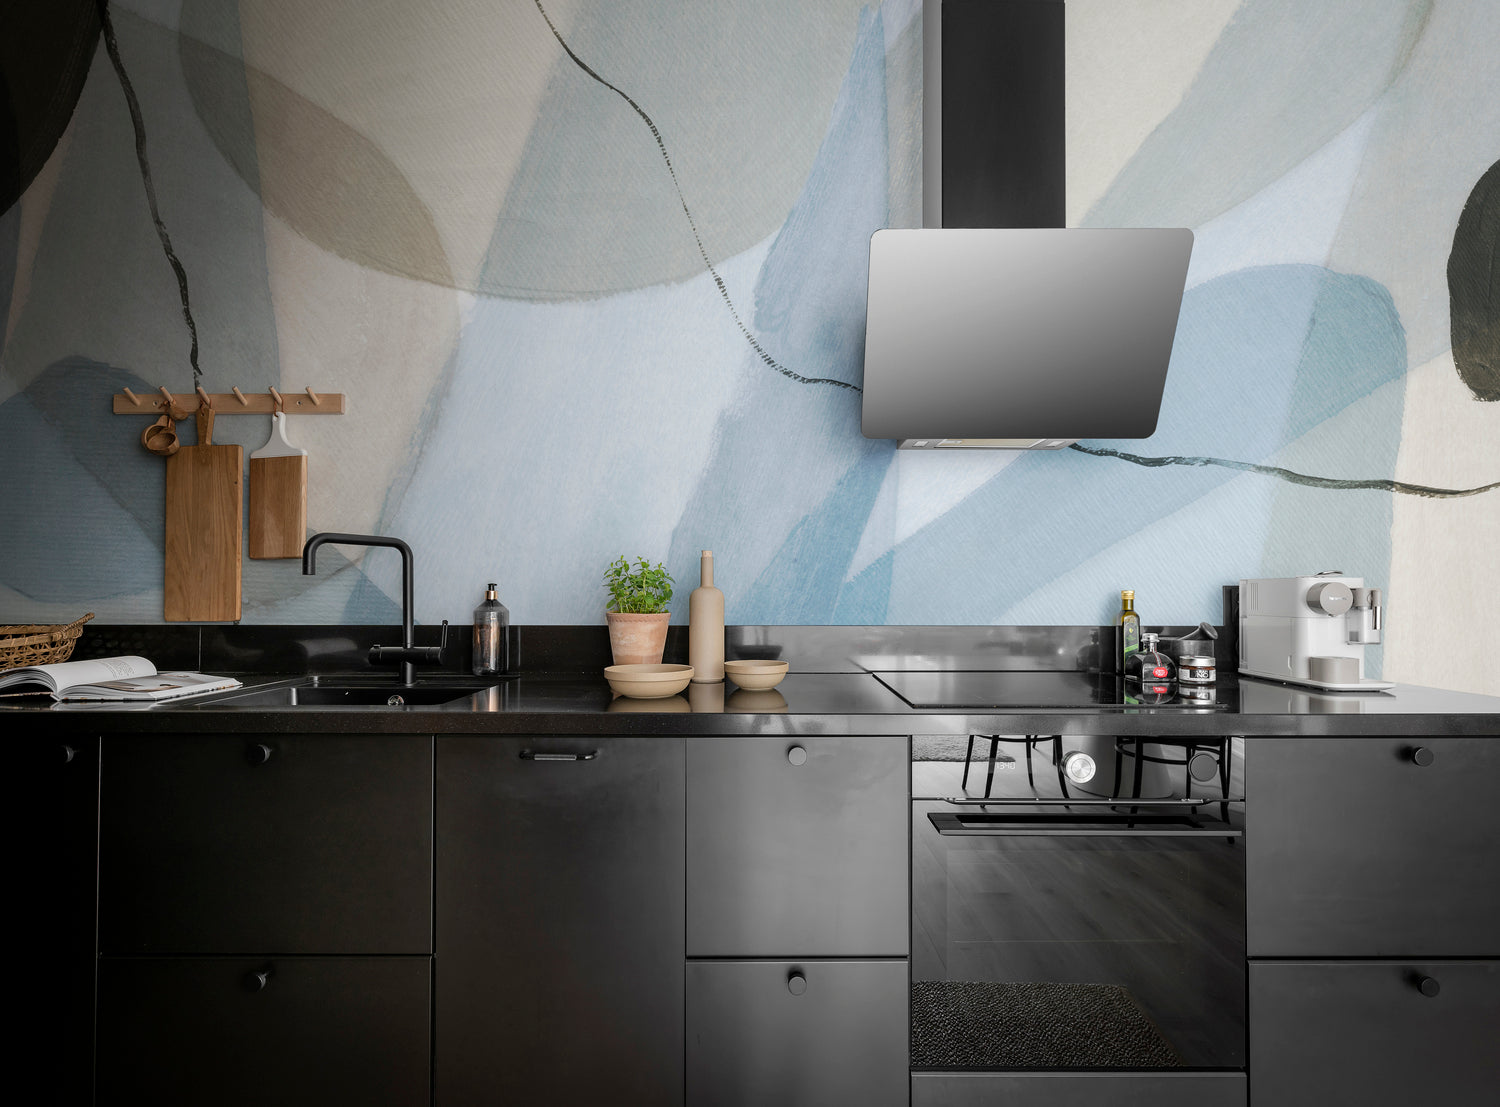 Asana, Abstract Mural Wallpaper in blue featured on the wall of a kitchen area with black cabinets